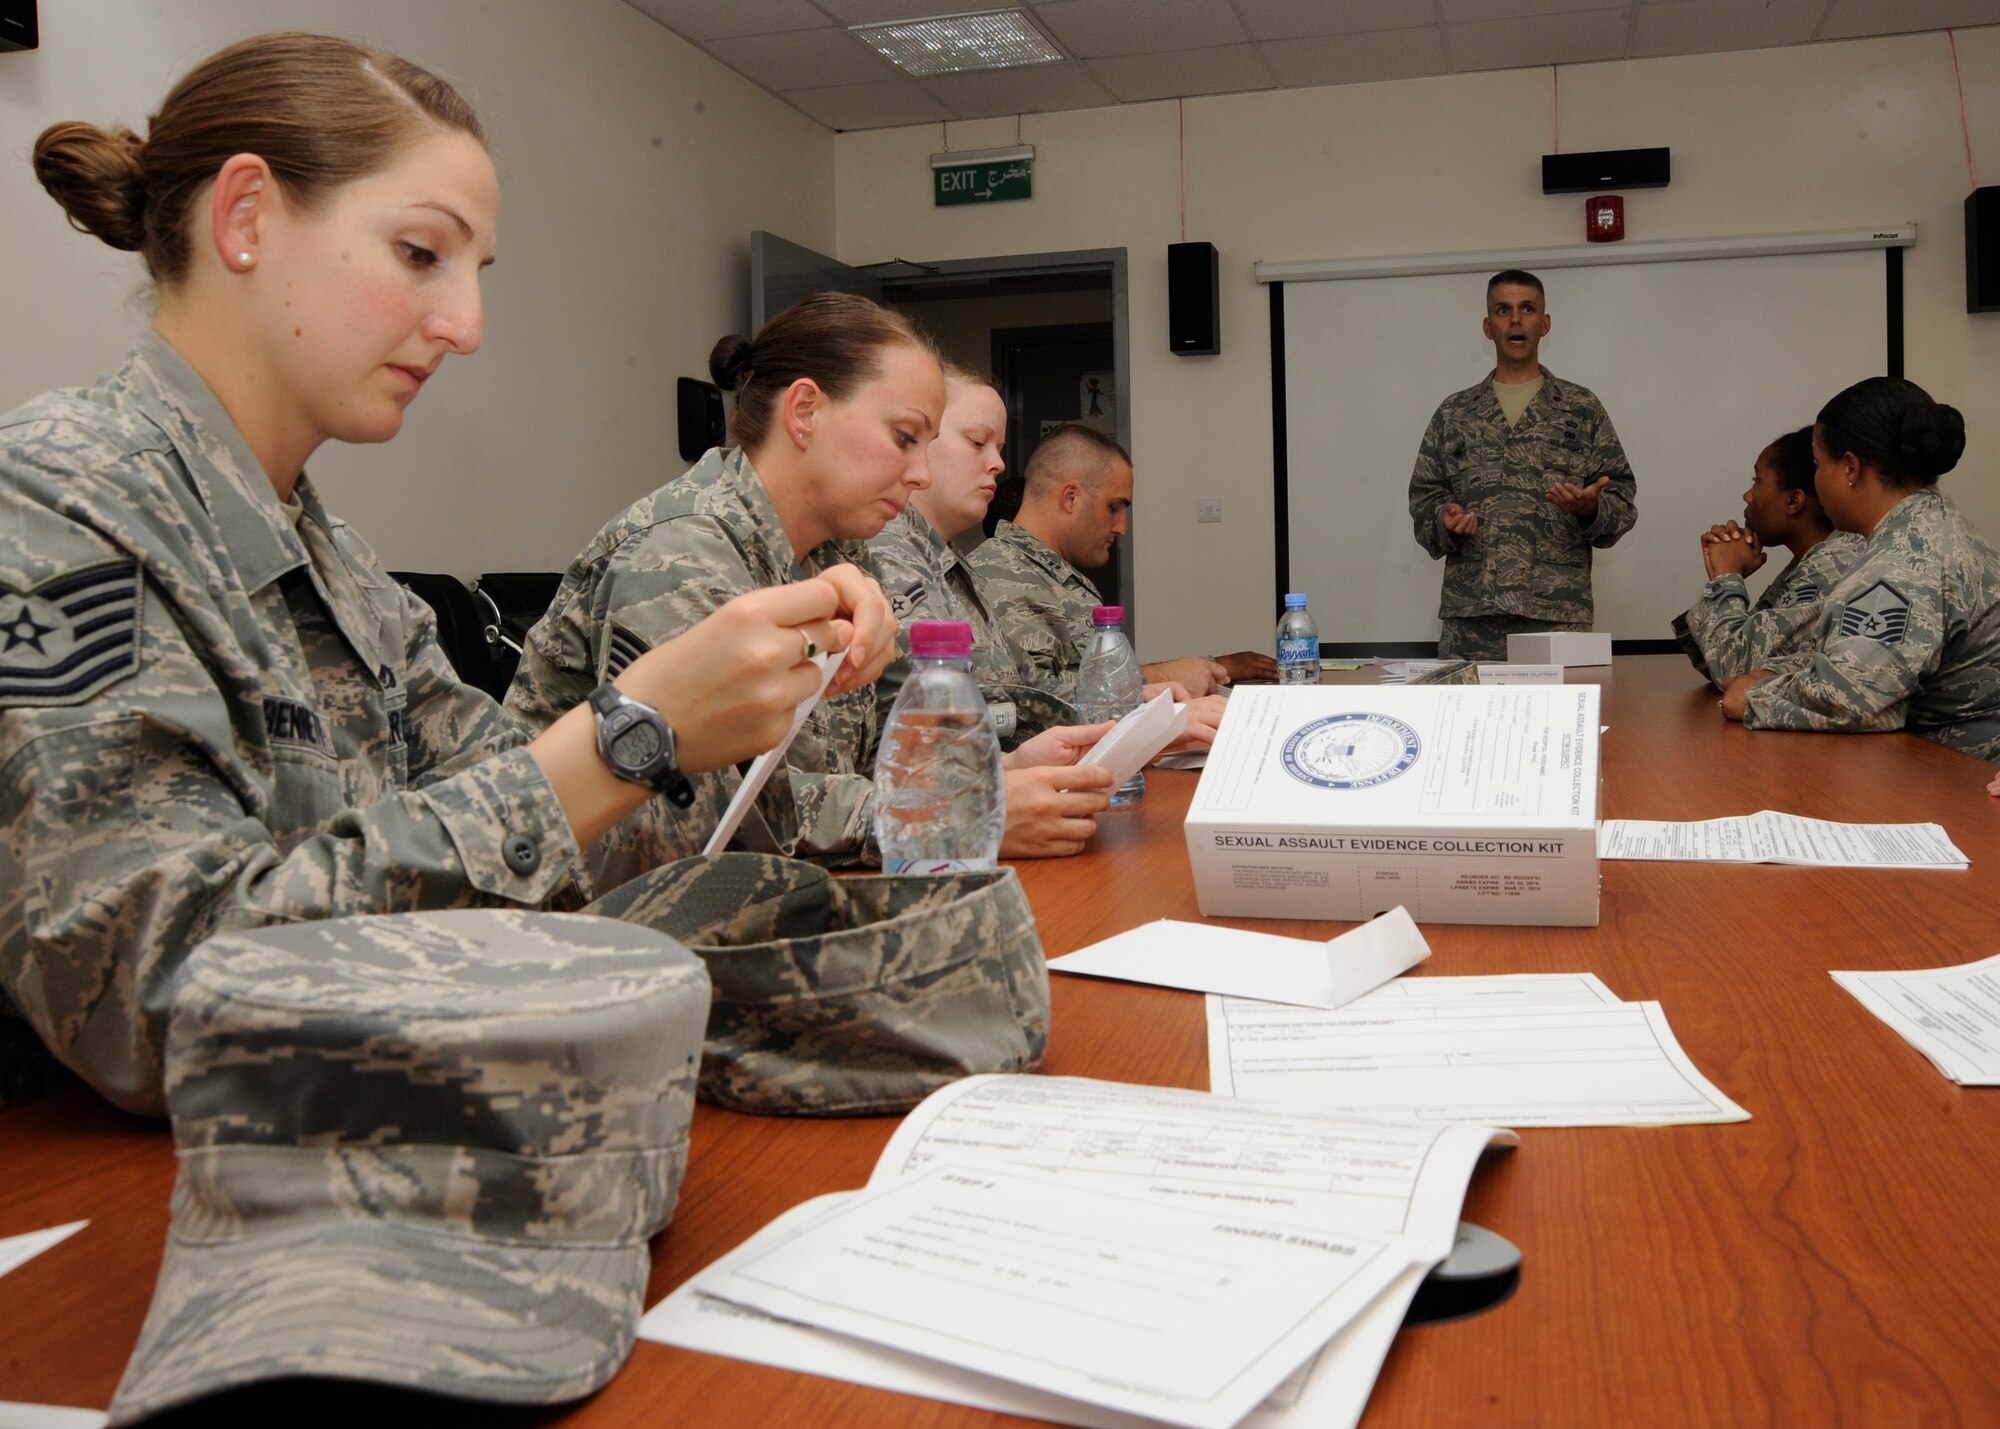 Maj. Scott Crum goes over the contents of a Sexual Assault Evidence Collection Kit during a victim advocacy training course at the 379th Air Expeditionary Wing in Southwest Asia, Nov. 2, 2013. Looking at the kits allowed the volunteers to gain insight on what victims may have to encounter when they visit the hospital for a sexual assault forensic evidence exam. Crum is the 379th AEW sexual assault response coordinator deployed from Joint Base San Antonio-Randolph, Texas, and a Clifton, N.J., native. (U.S. Air Force photo/ Senior Airman Bahja J. Jones) 